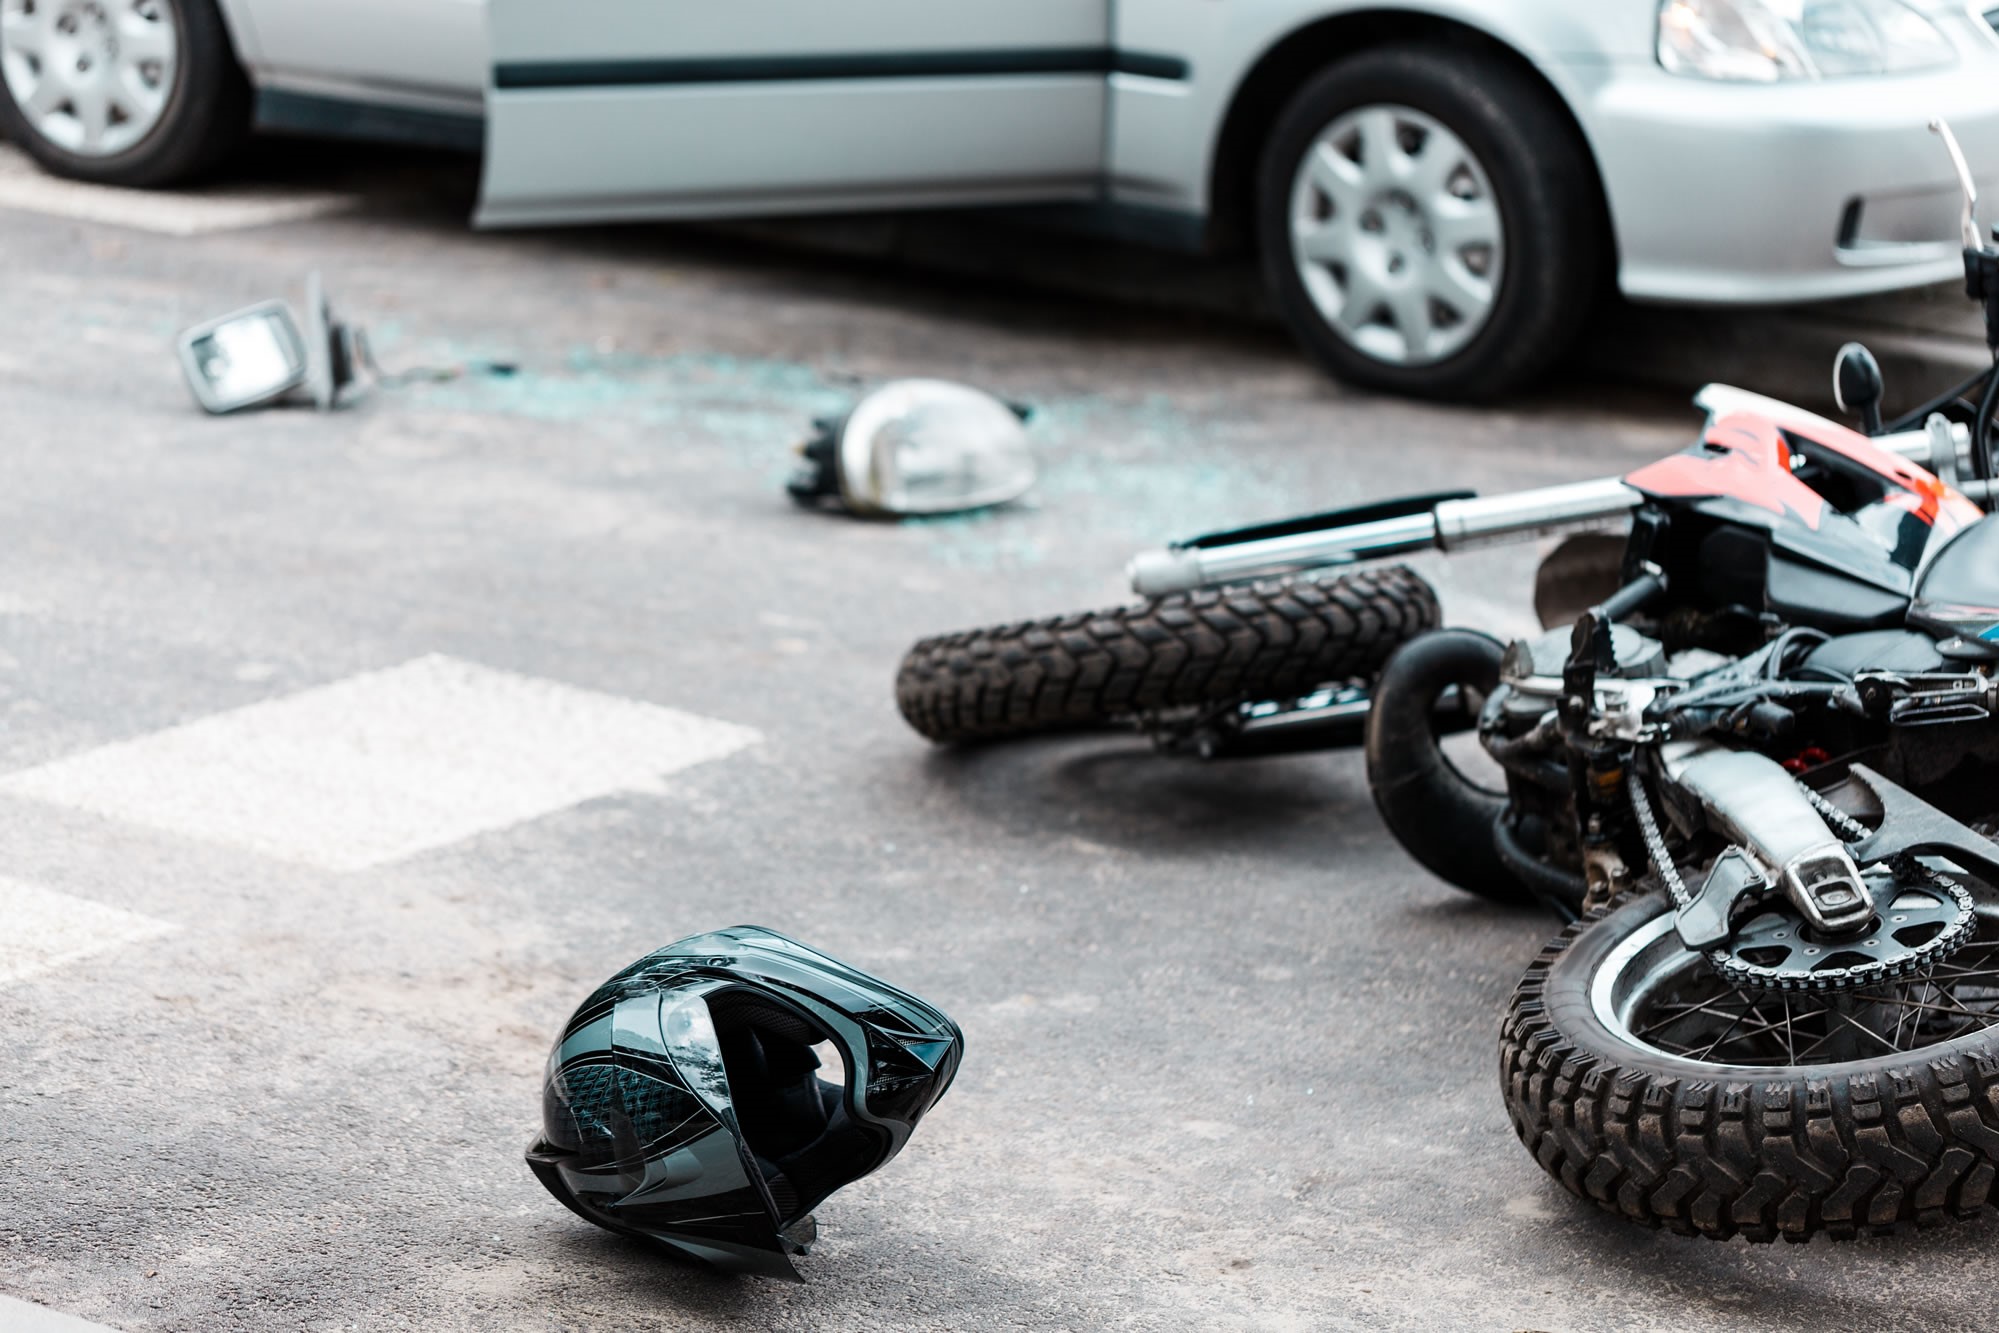 Motorbike, Motorcycle Accident, claims solicitors Aberdeen